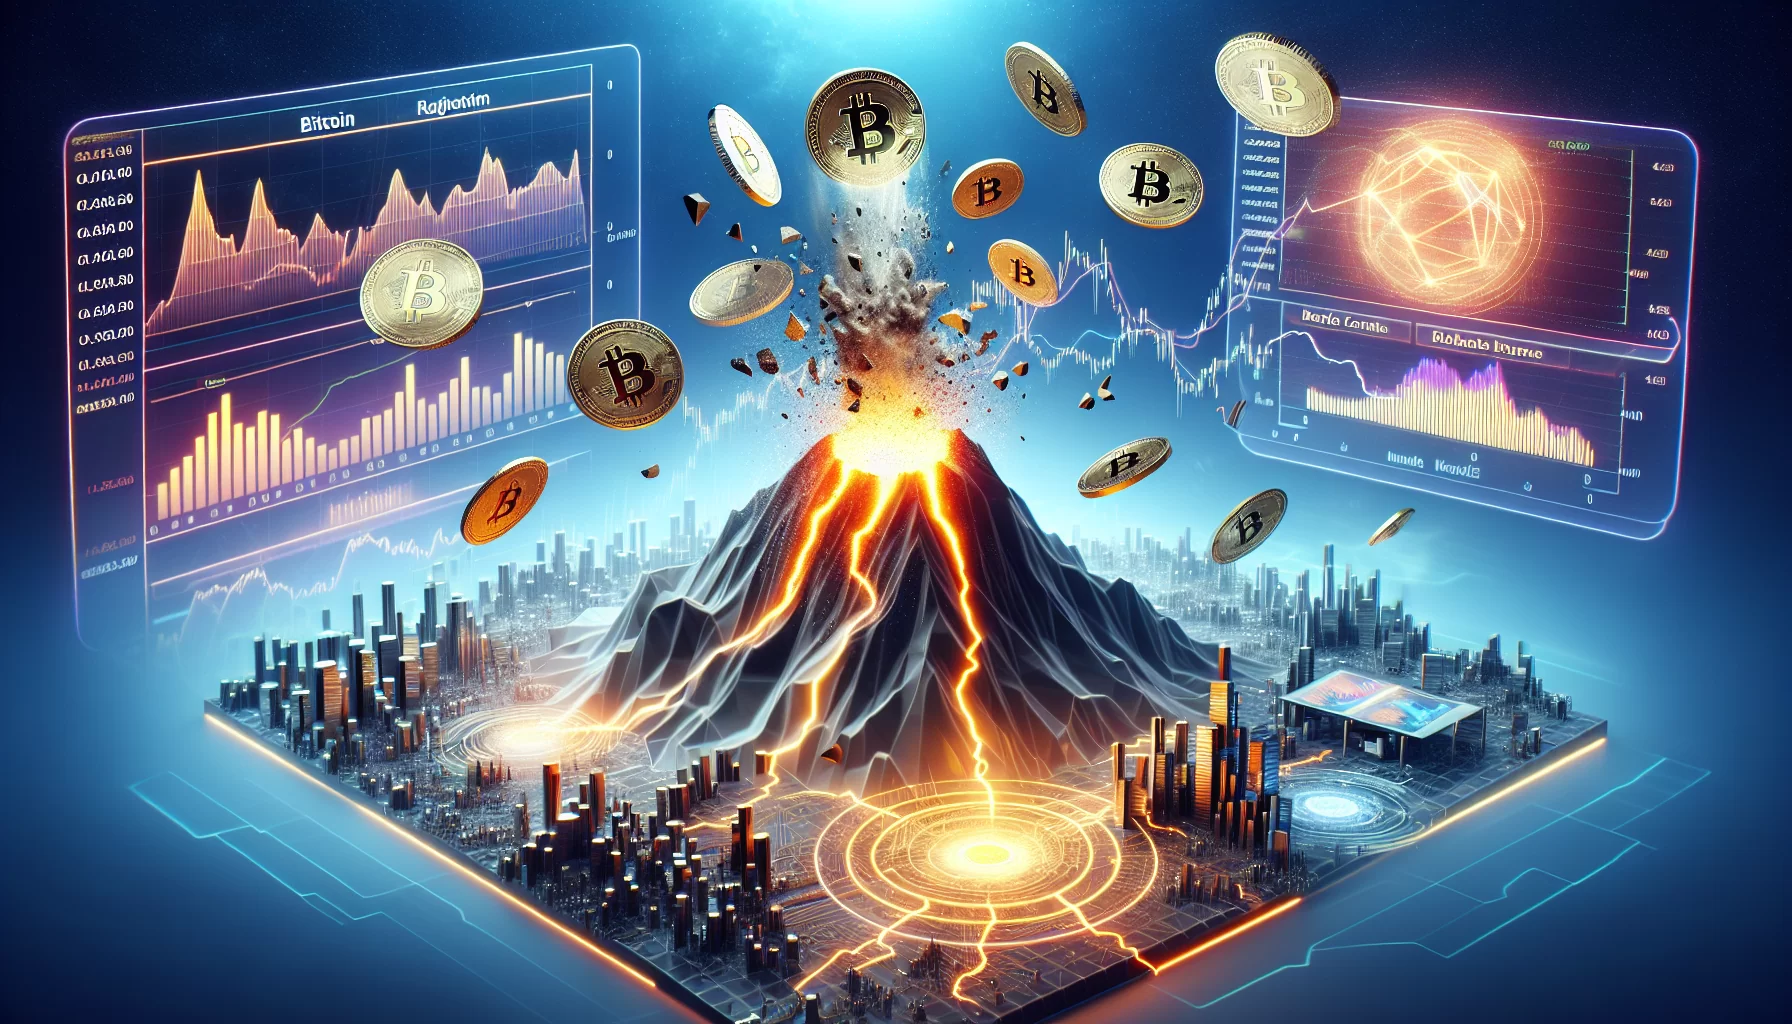 Analyzing the potential market impact of Mt. Gox's upcoming bitcoin payout